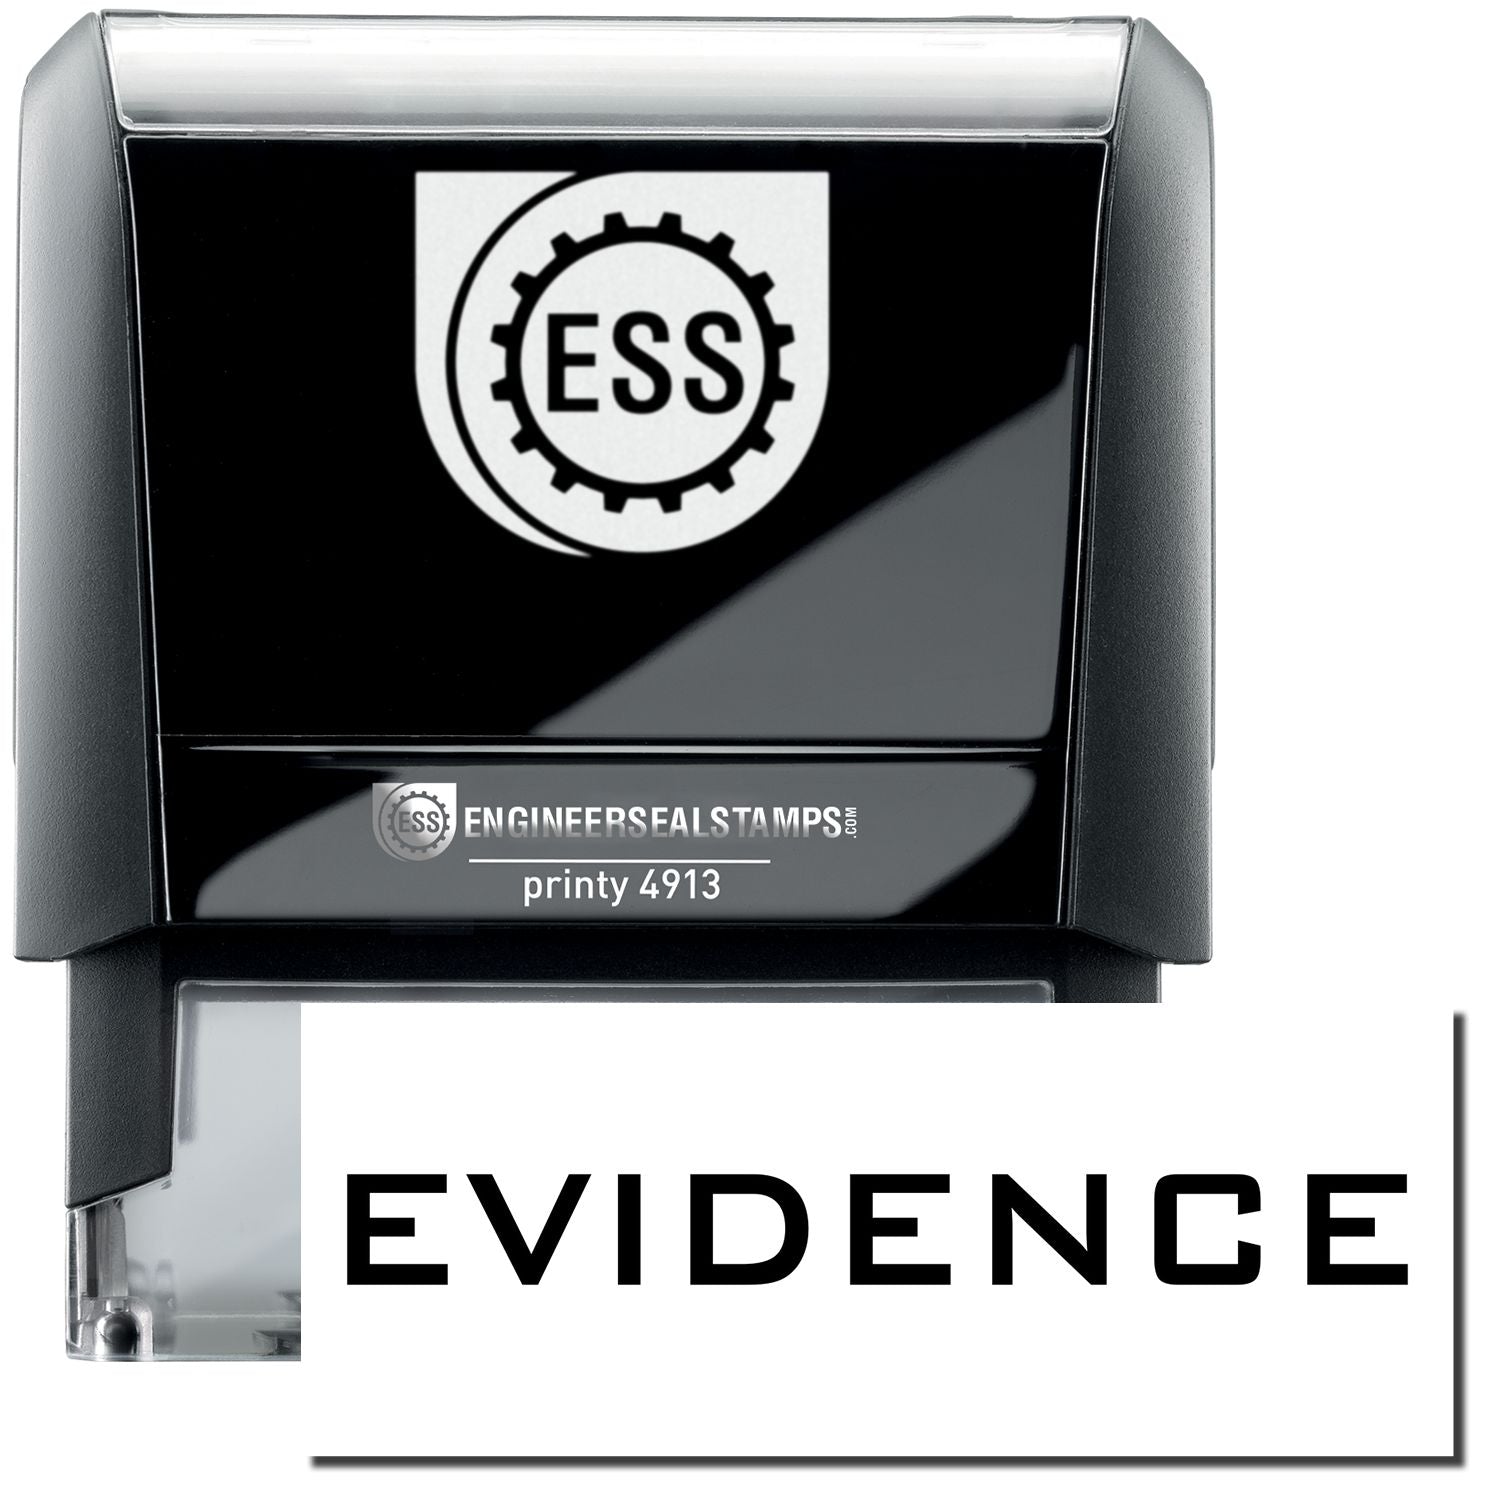 A self-inking stamp with a stamped image showing how the text "EVIDENCE" in a large bold font is displayed by it.